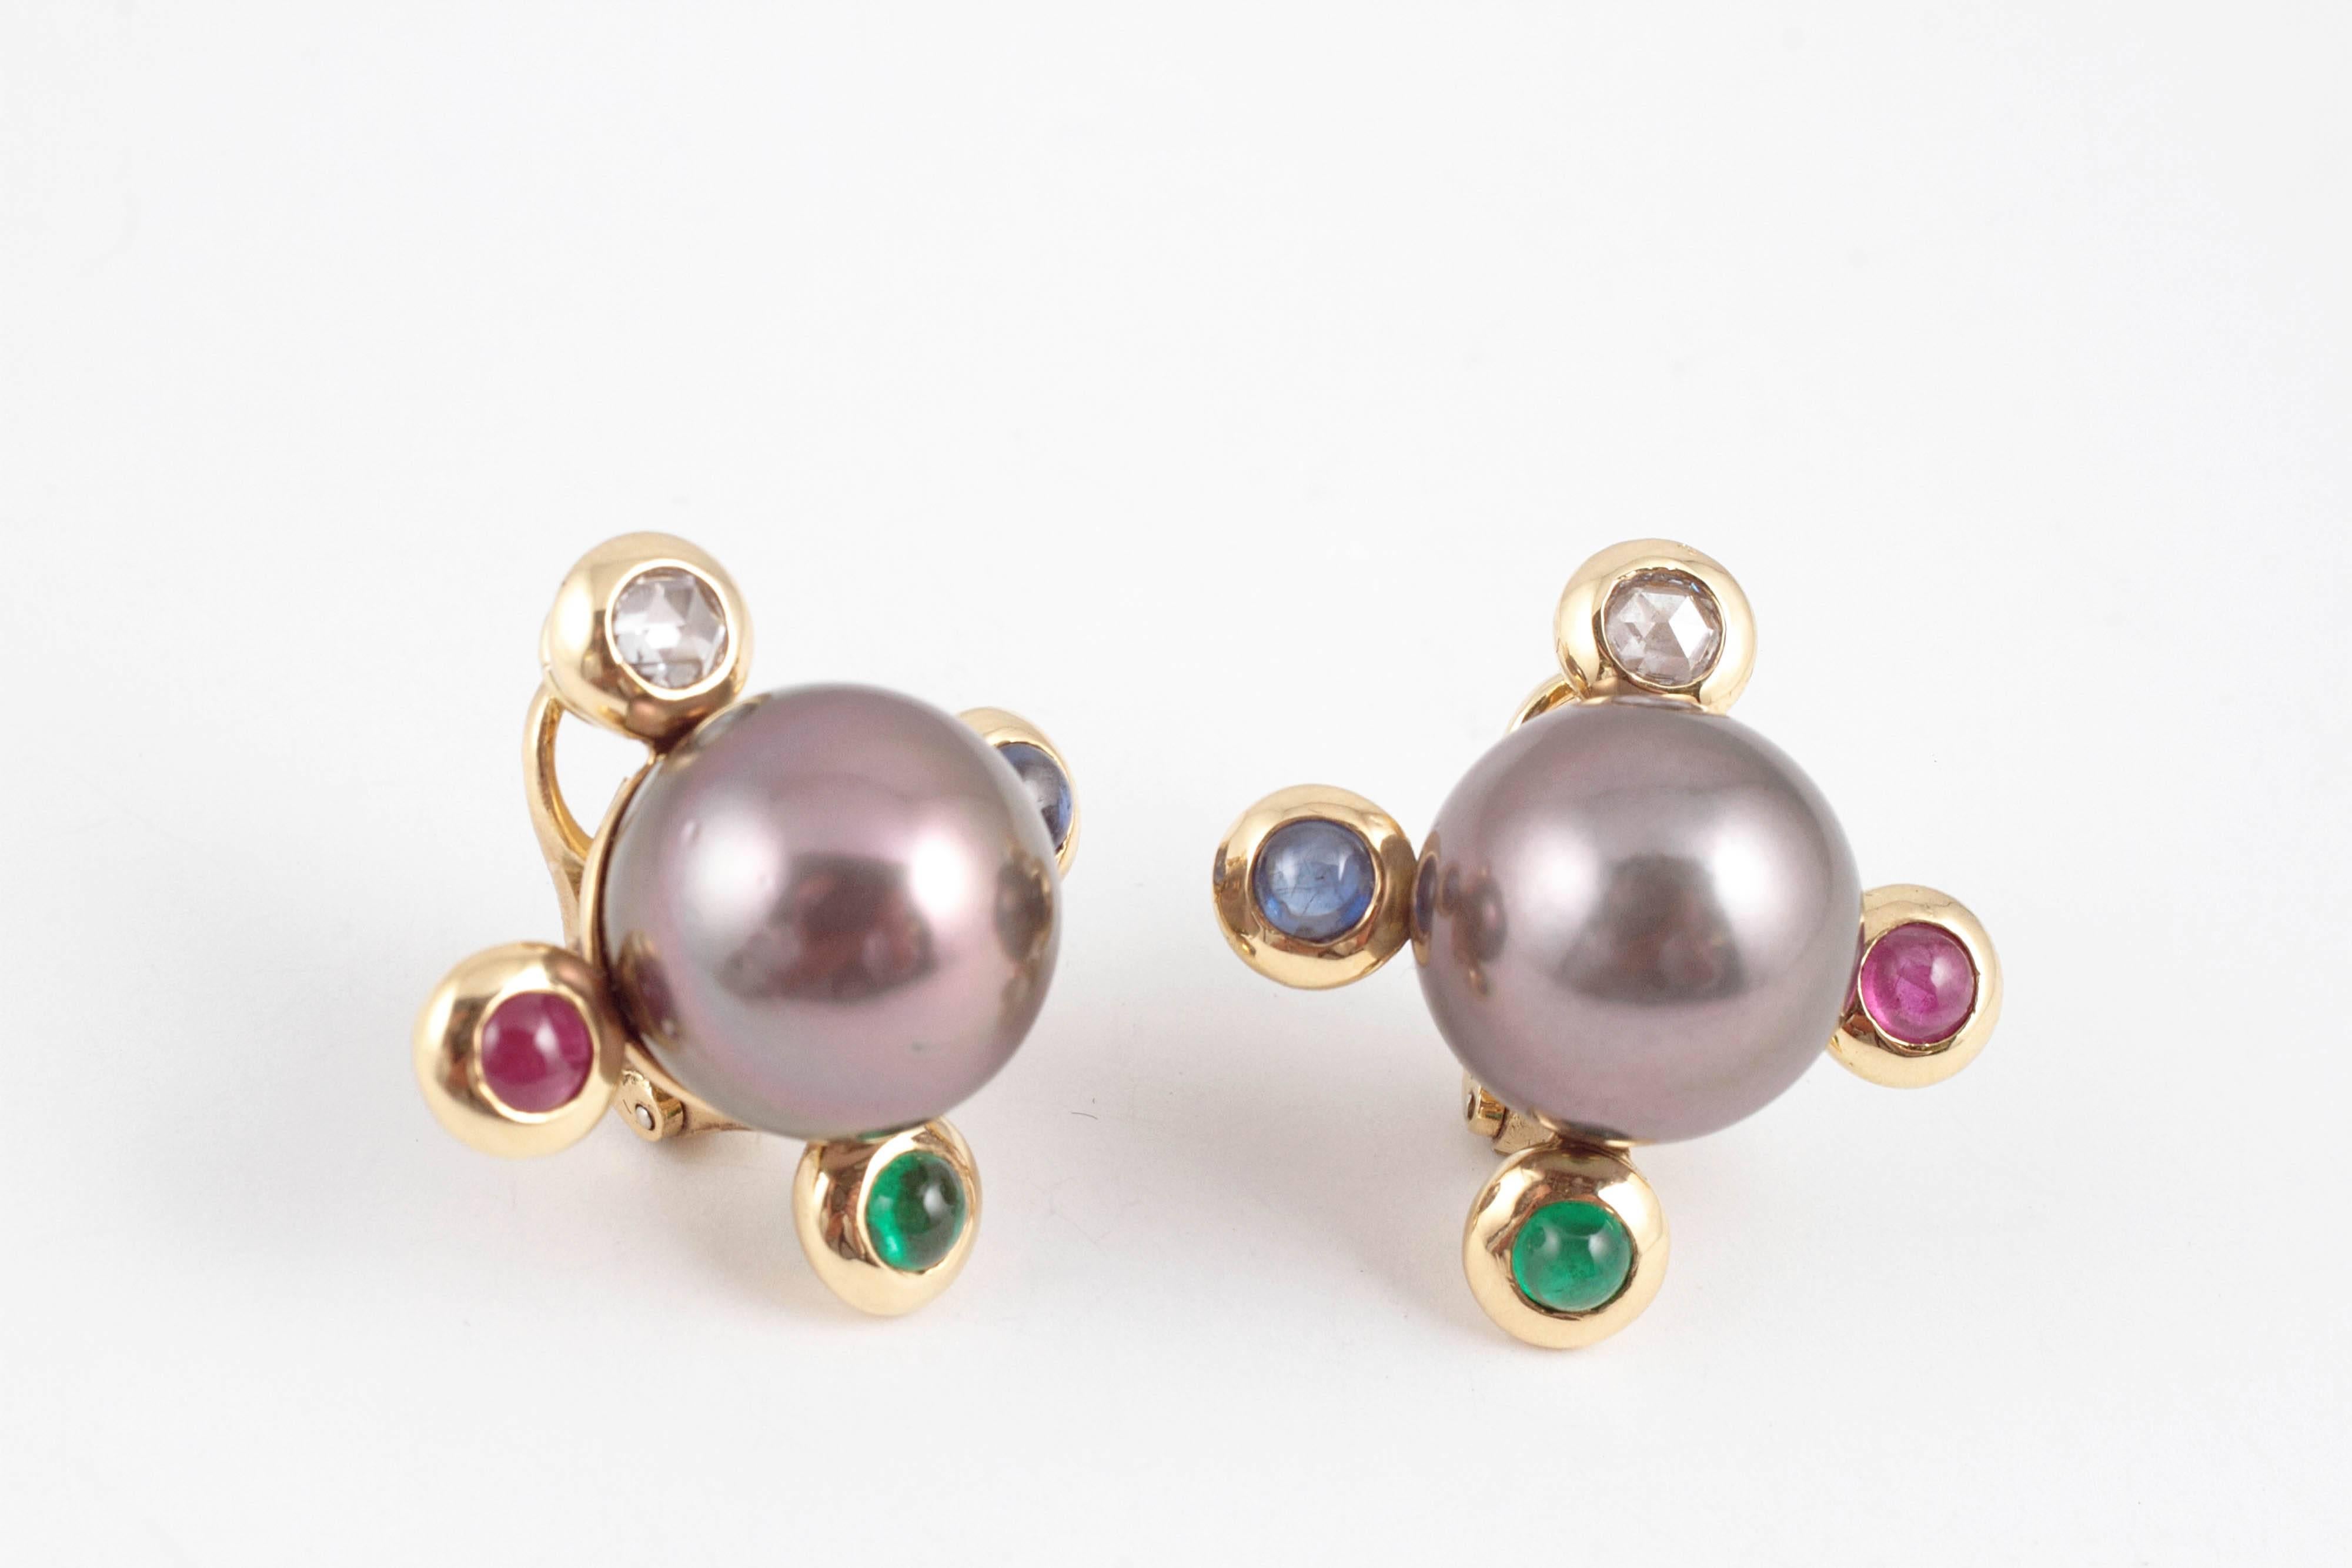 Looking for something unusual?  These 18 karat yellow gold, 14.00 mm natural color, Tahitian cultured pearl earrings are just the ticket! They have 0.50 cts of diamonds, 2.10 cts of sapphires and rubies and emeralds on each corner.  You will